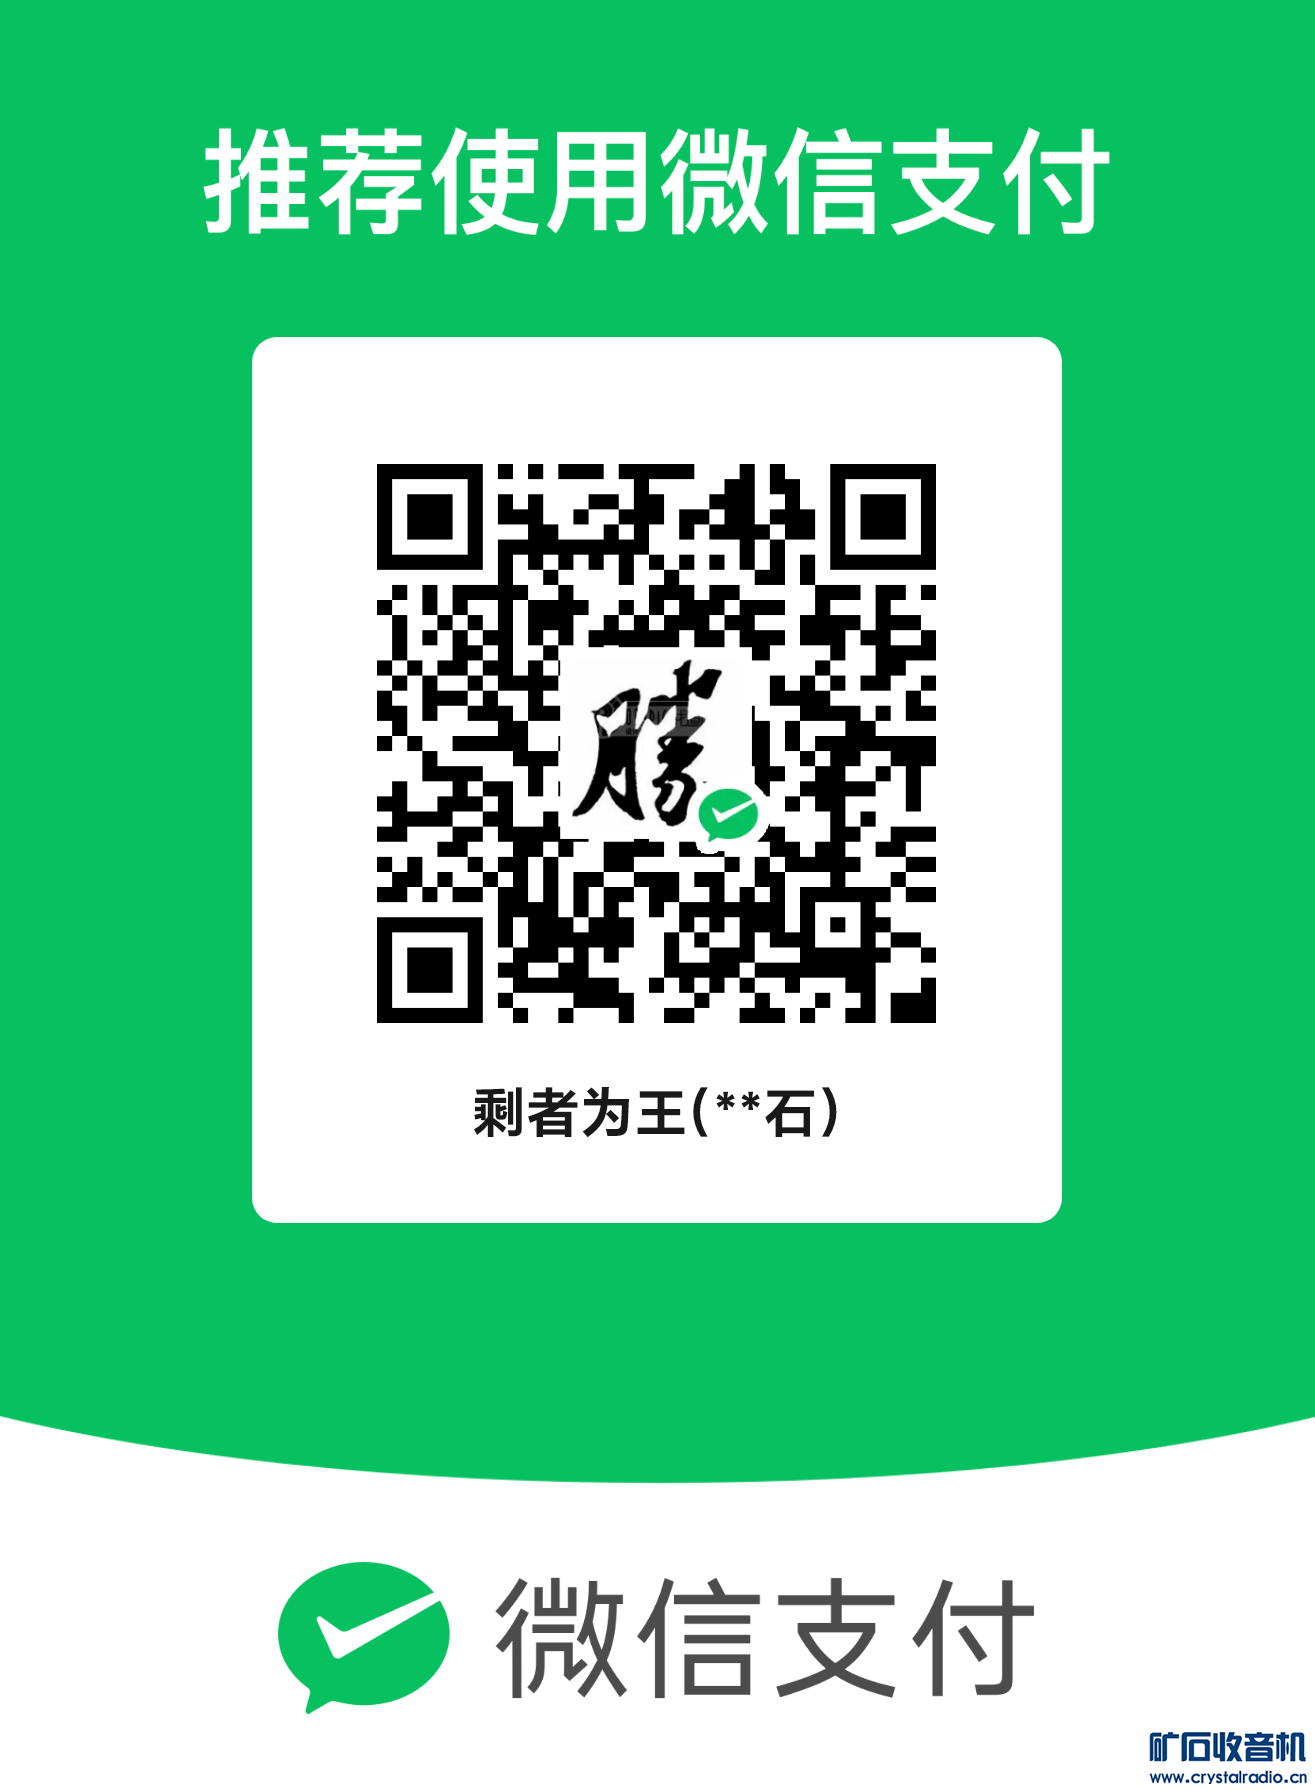 mm_facetoface_collect_qrcode_1686280274645.png